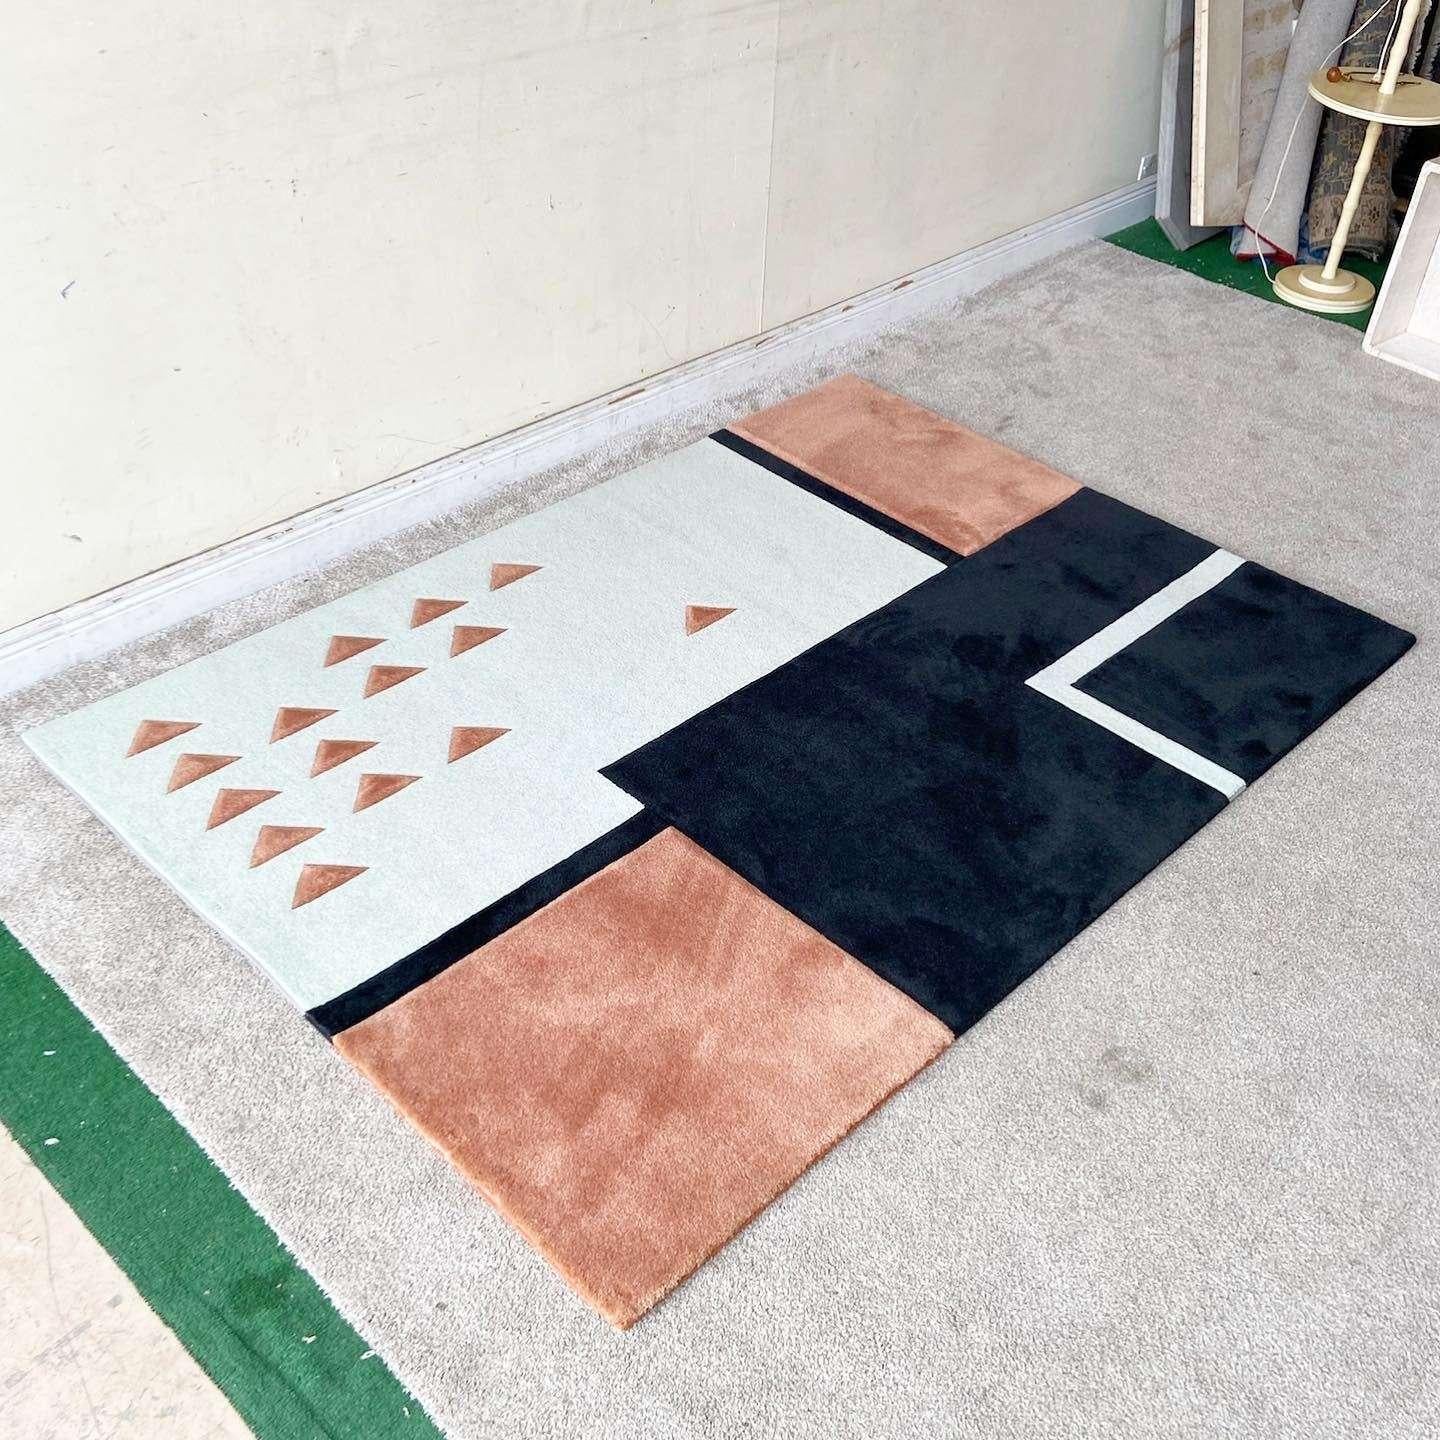 Radical vintage modern rectangular area rug. Features black, peach and off-white rectangles partitioned off by black borders. Off-white sections displays several peach triangles.

Rug 8
